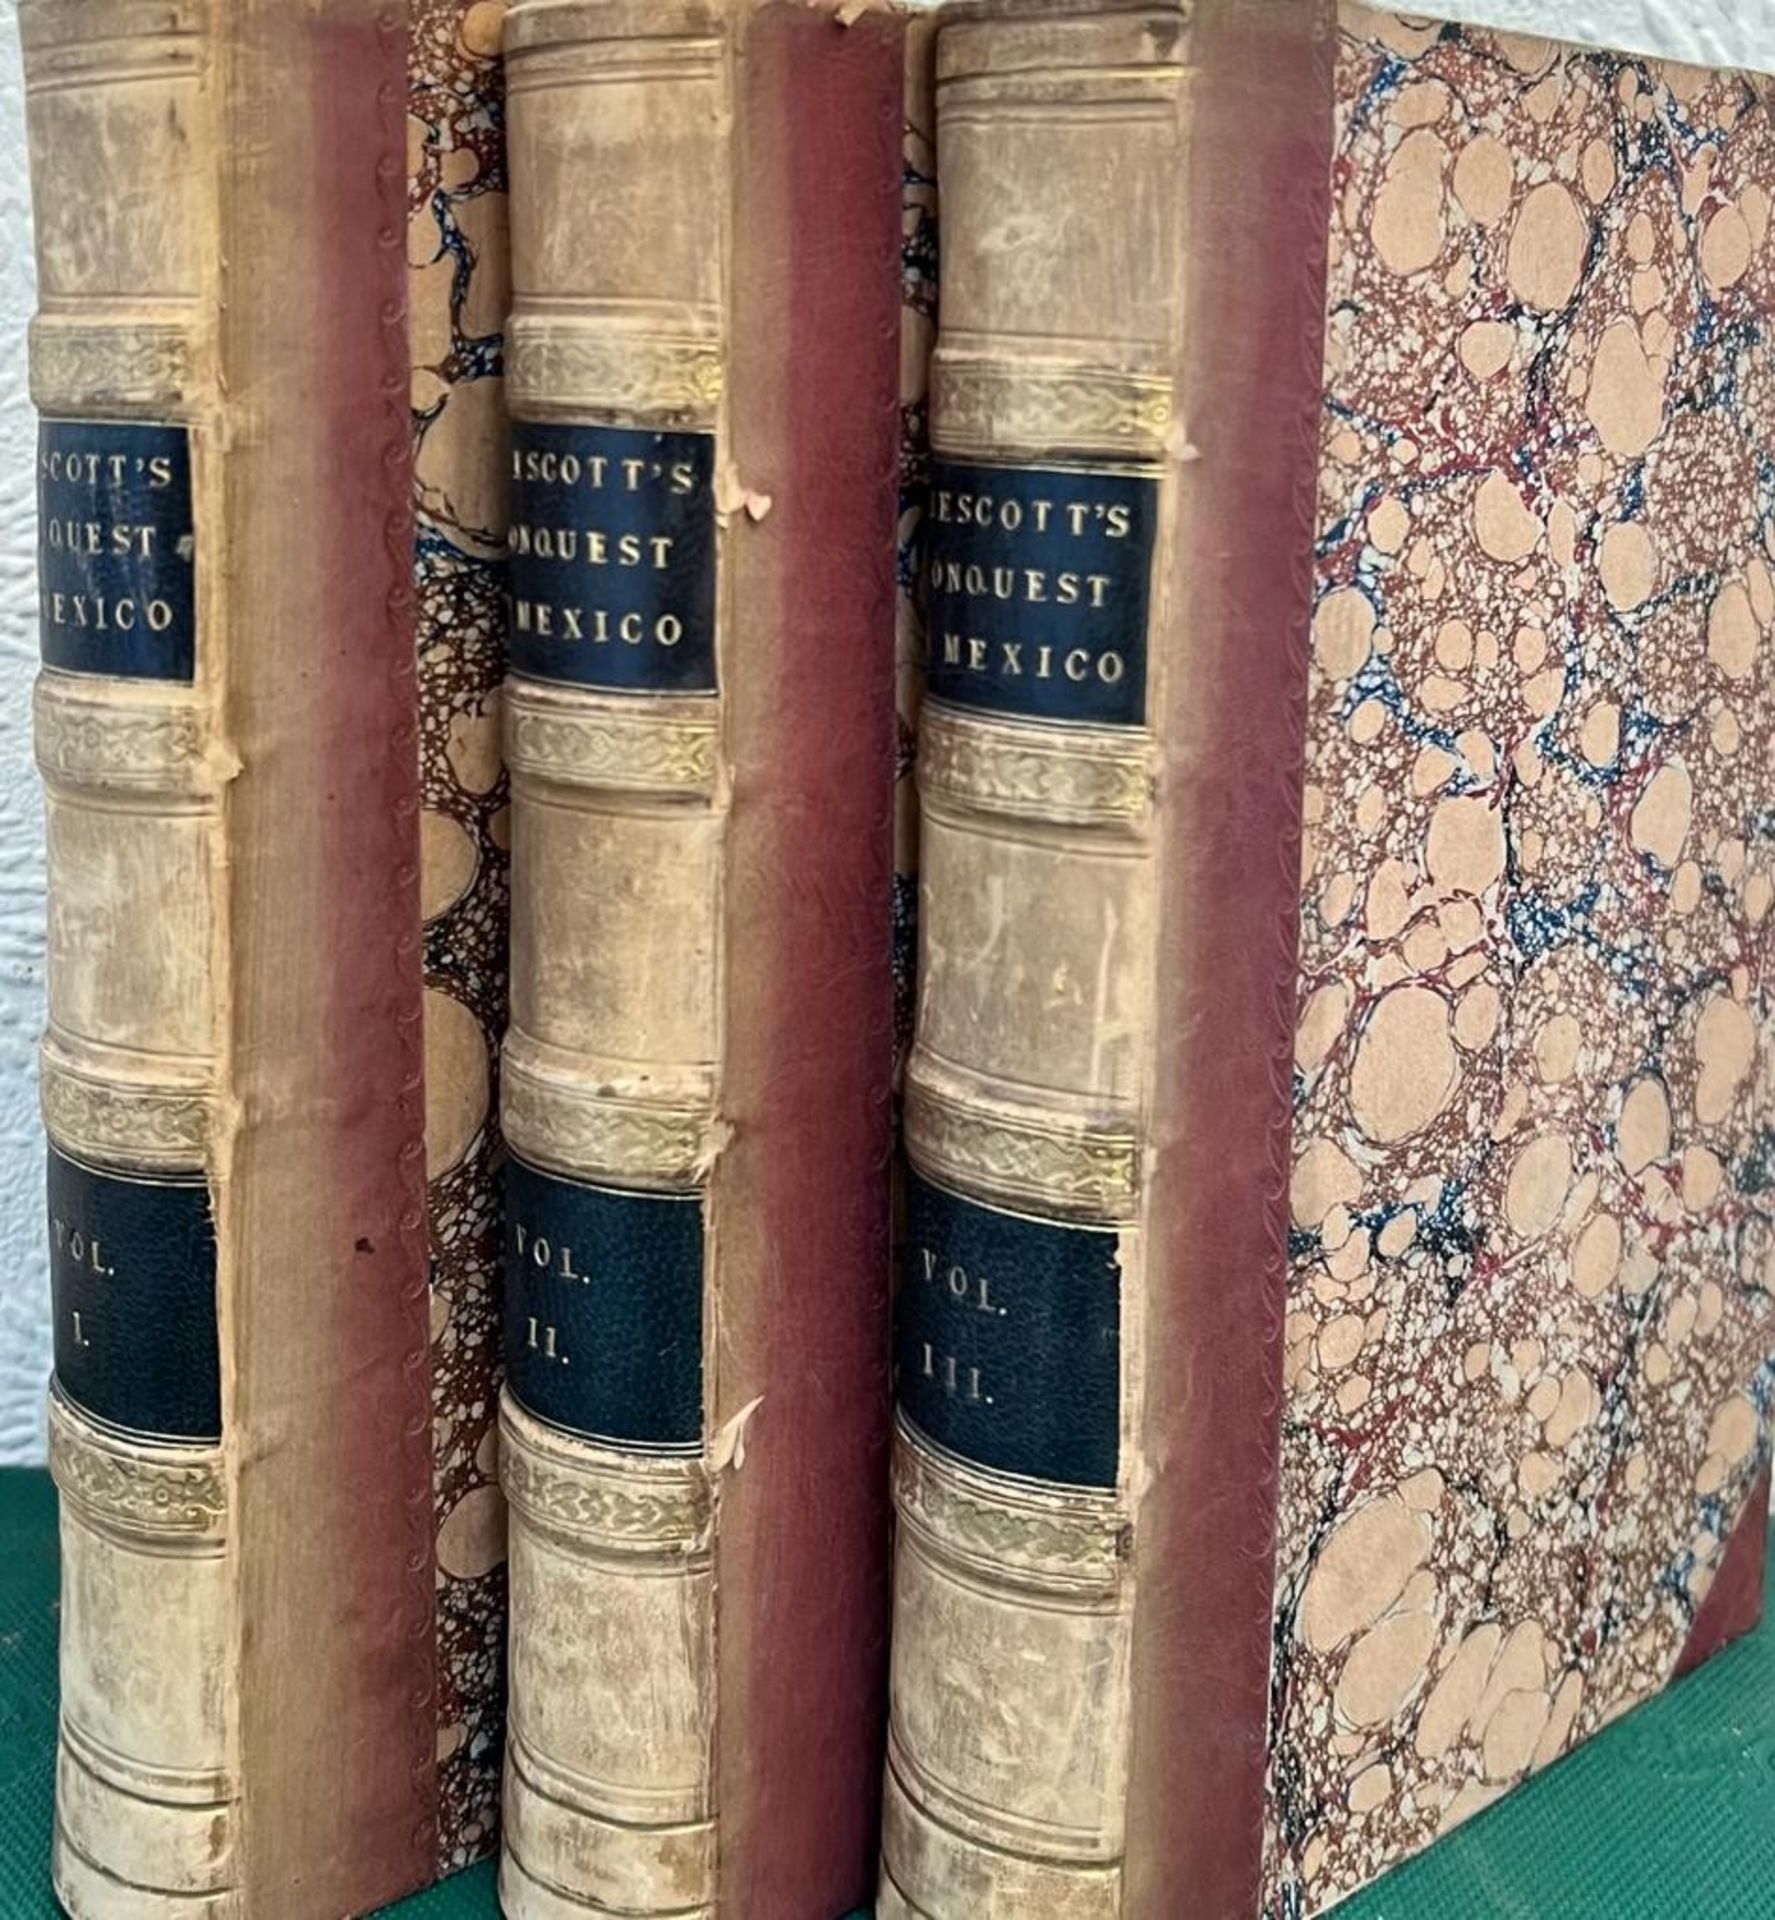 PRESCOTT, WILLIAM, CONQUEST OF MEXICO, 1844, THREE VOLUMES, QUARTER LEATHER WITH MARBLED BOARDS